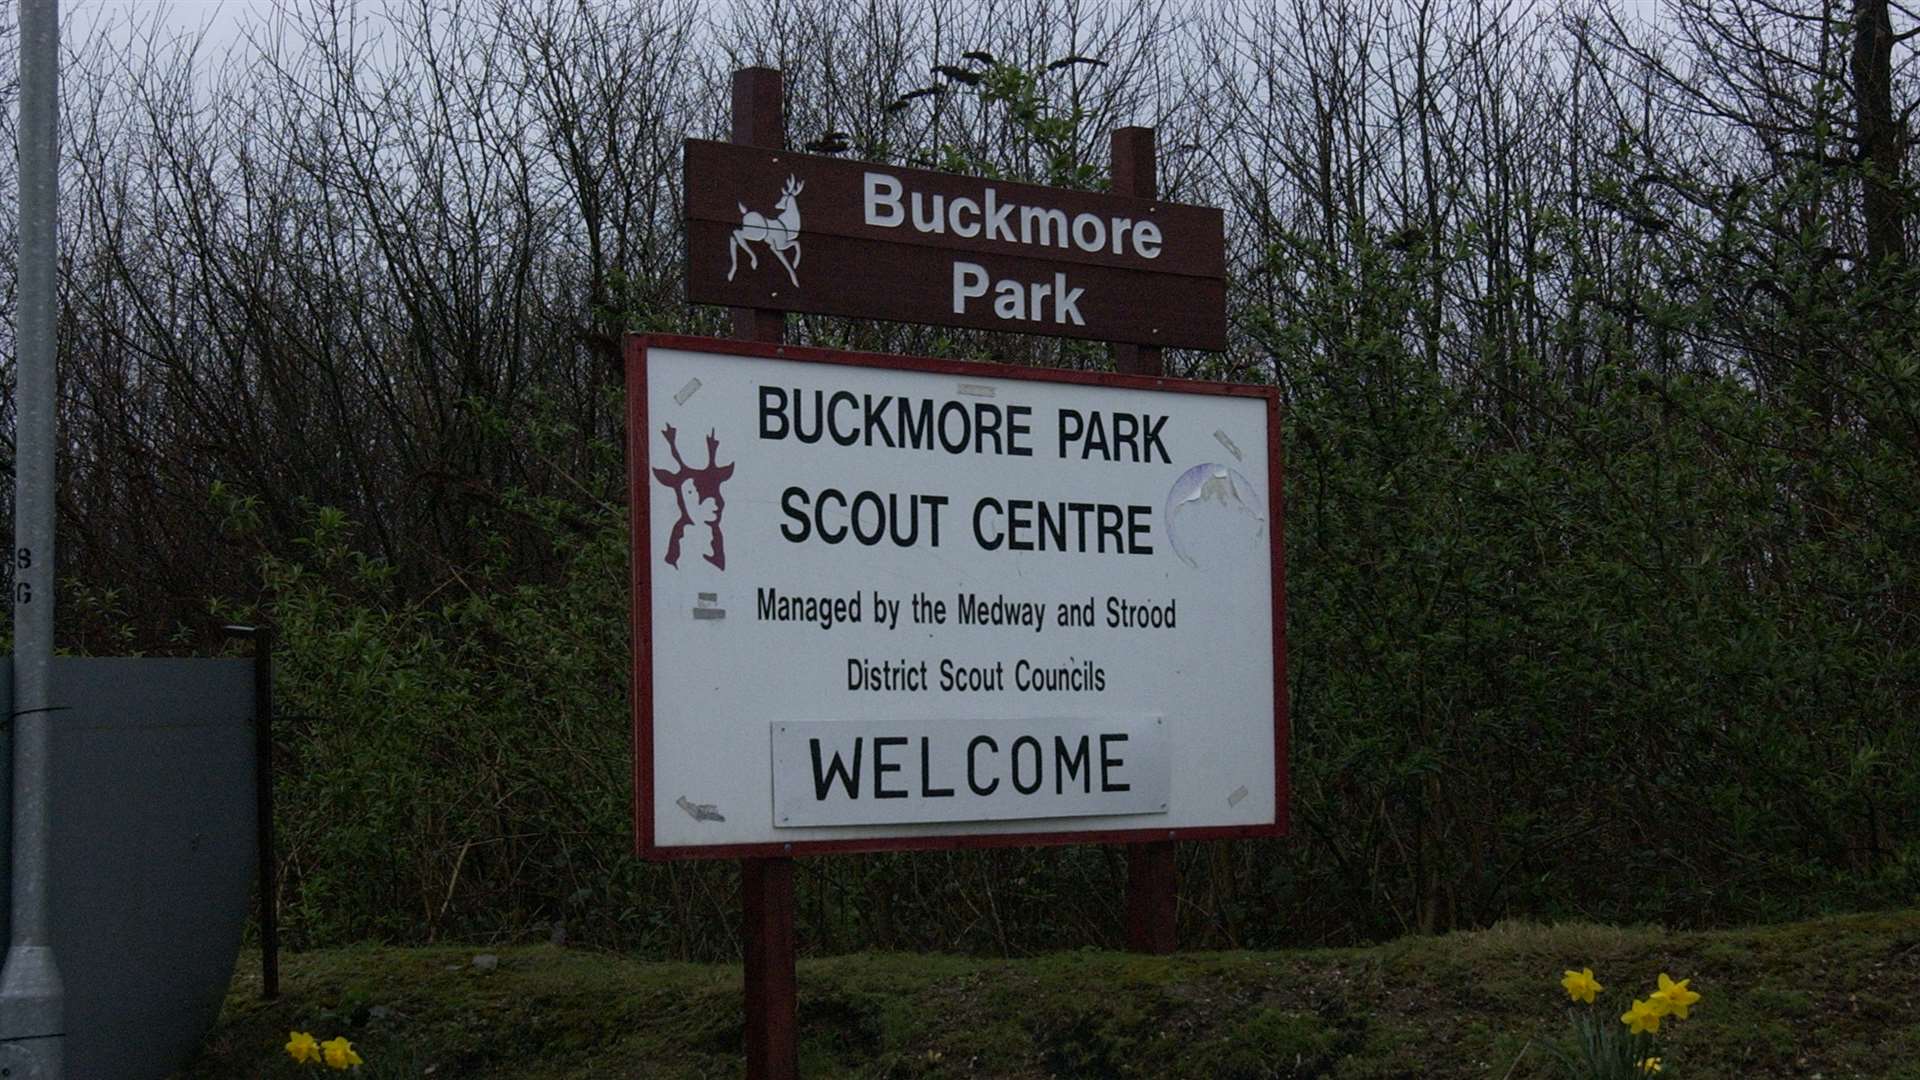 Buckmore Park before its closure as a Scouting centre